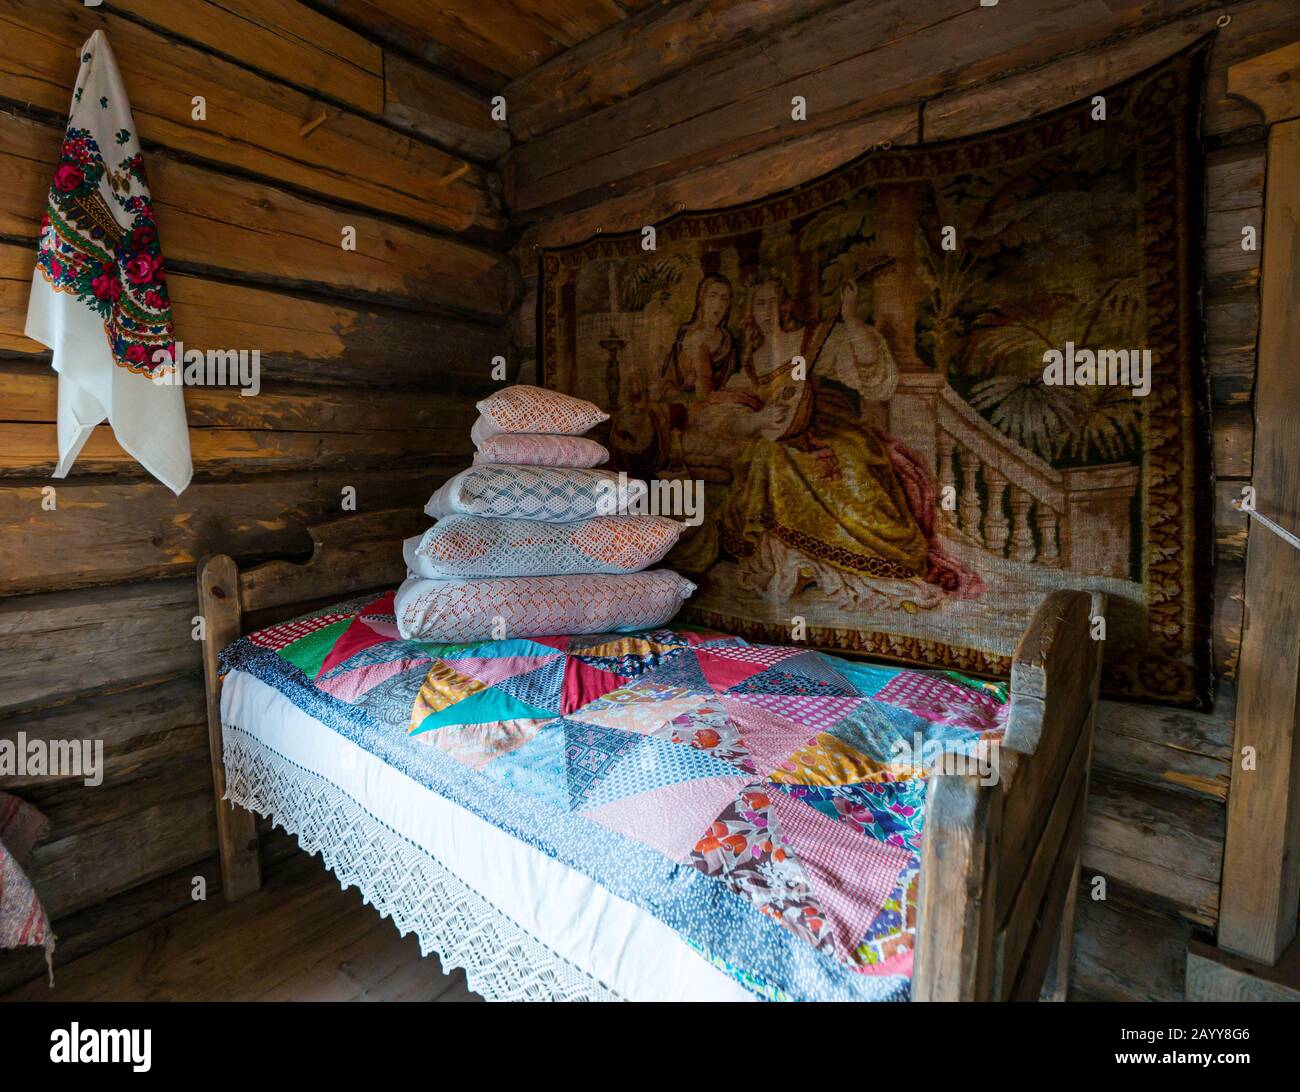 House log cabin interior with bed and patchwork quilt depicting traditional way of life, Taltsy Museum of Wooden Architecture, Irkutsk Region, Siberia Stock Photo